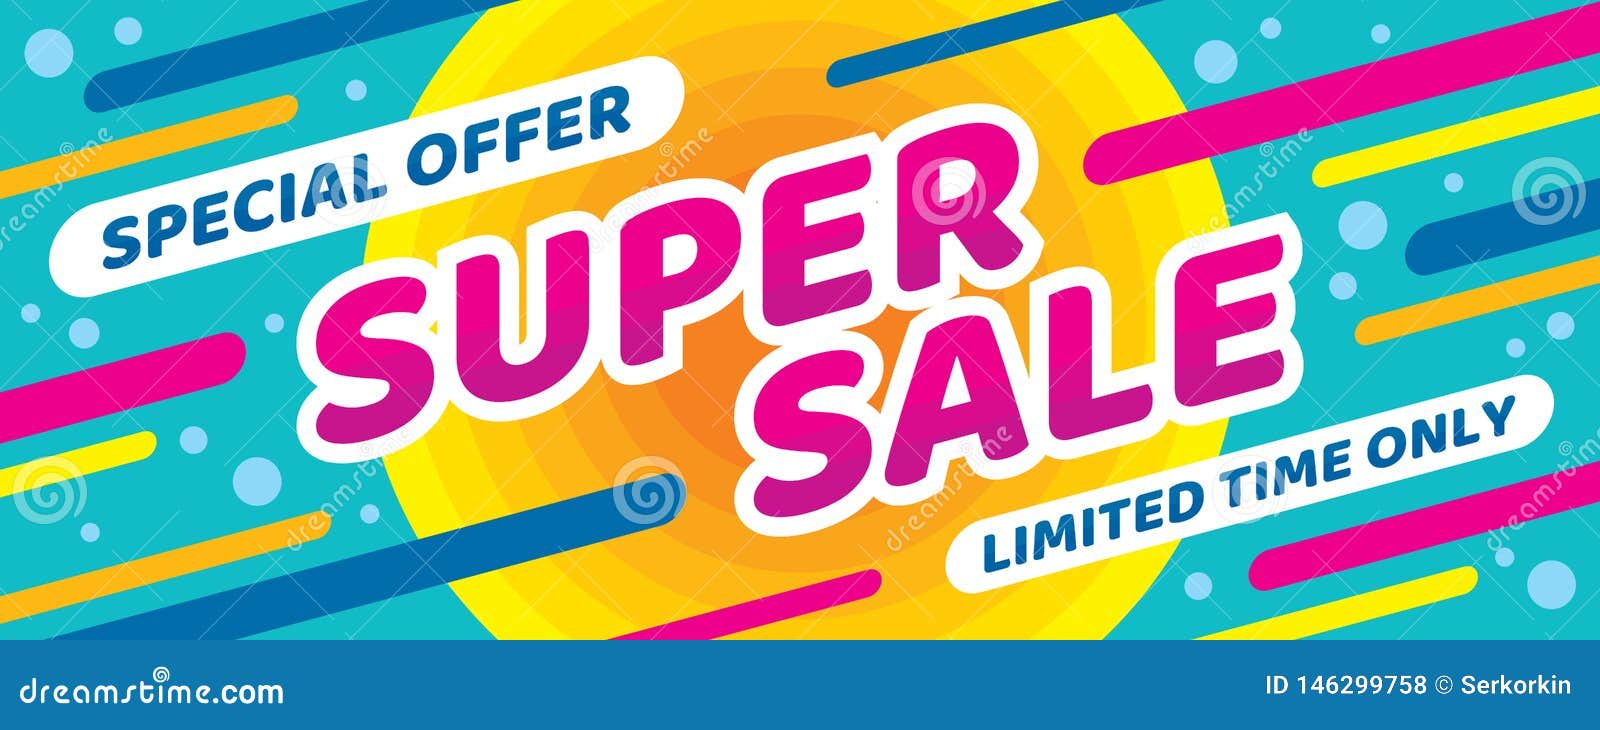 Limited Time Special Offer Banner Mockup Stock Vector